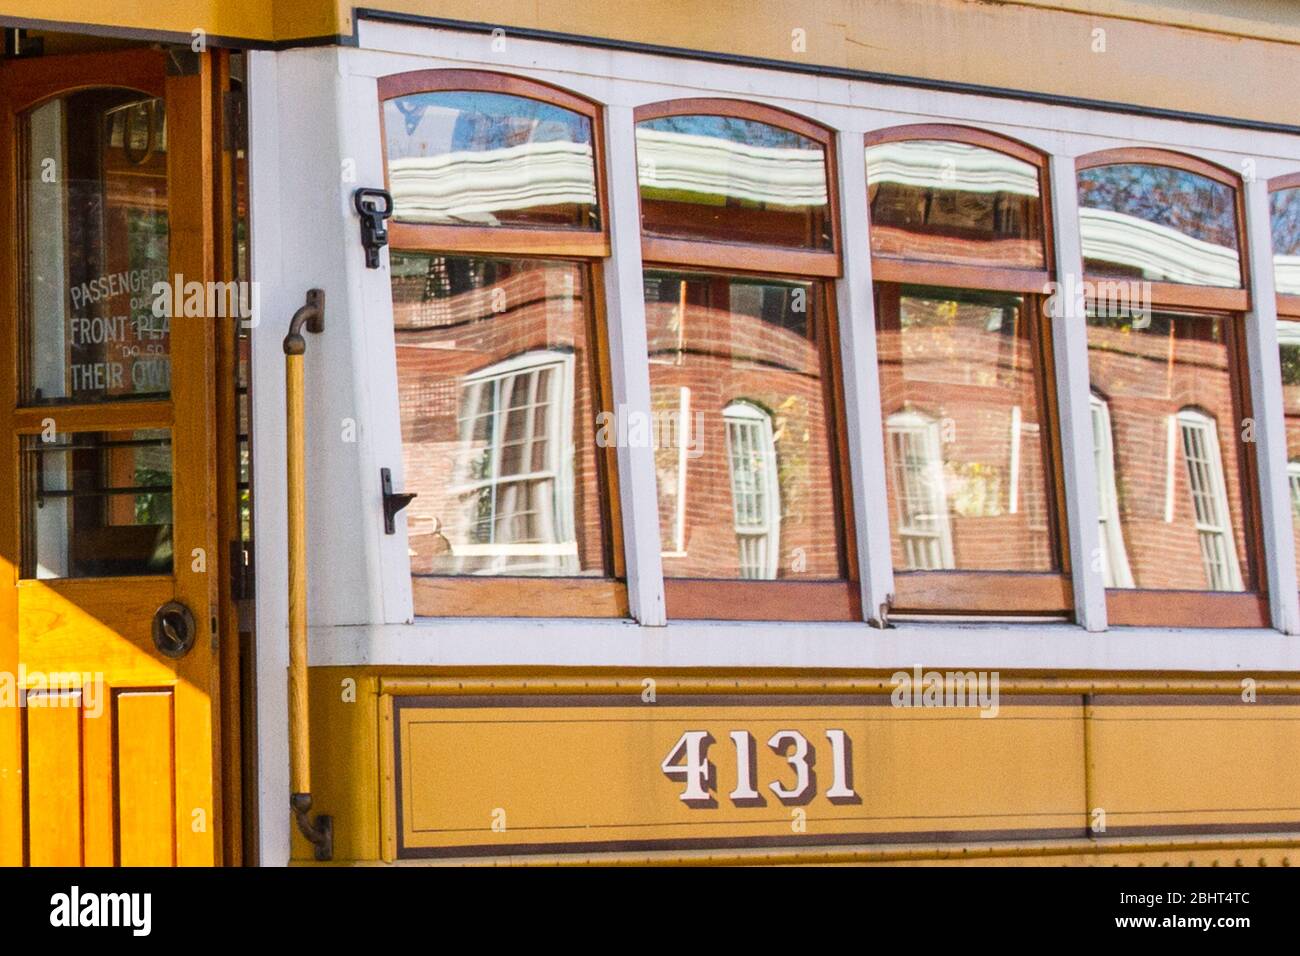 A trolley car at the Lowell National Park, Lowell, Massachusetts Stock Photo